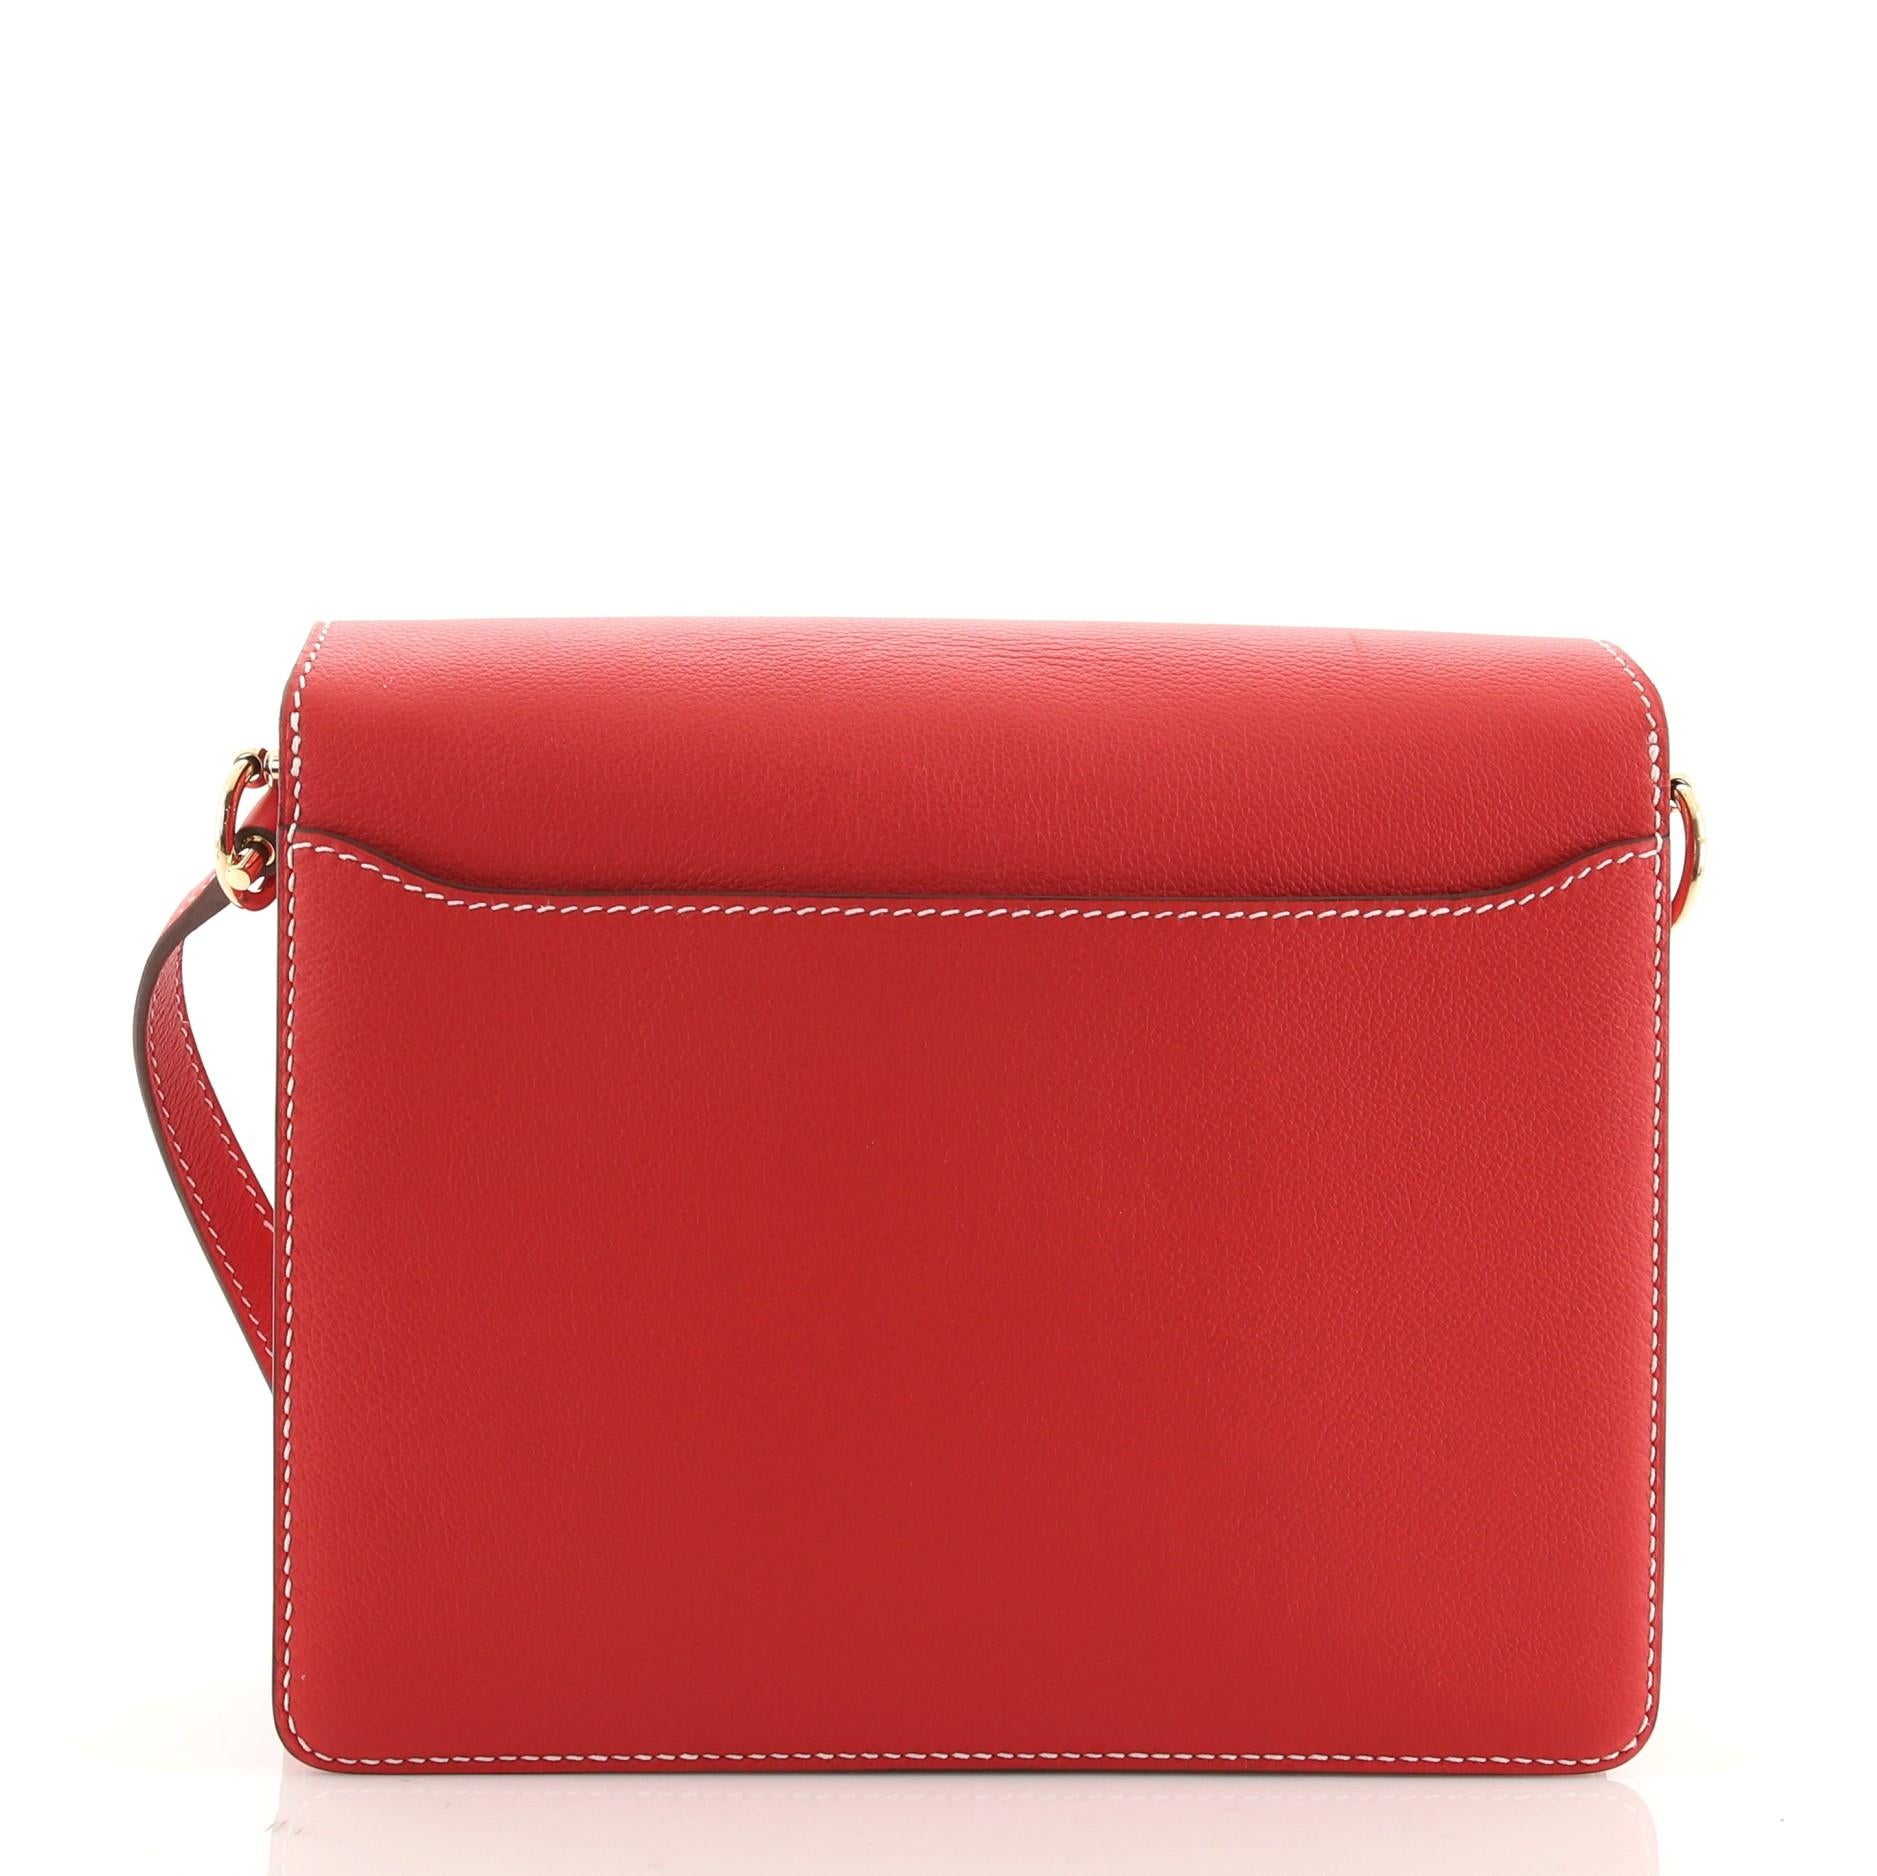 Red Hermes Roulis Bag Evercolor 23